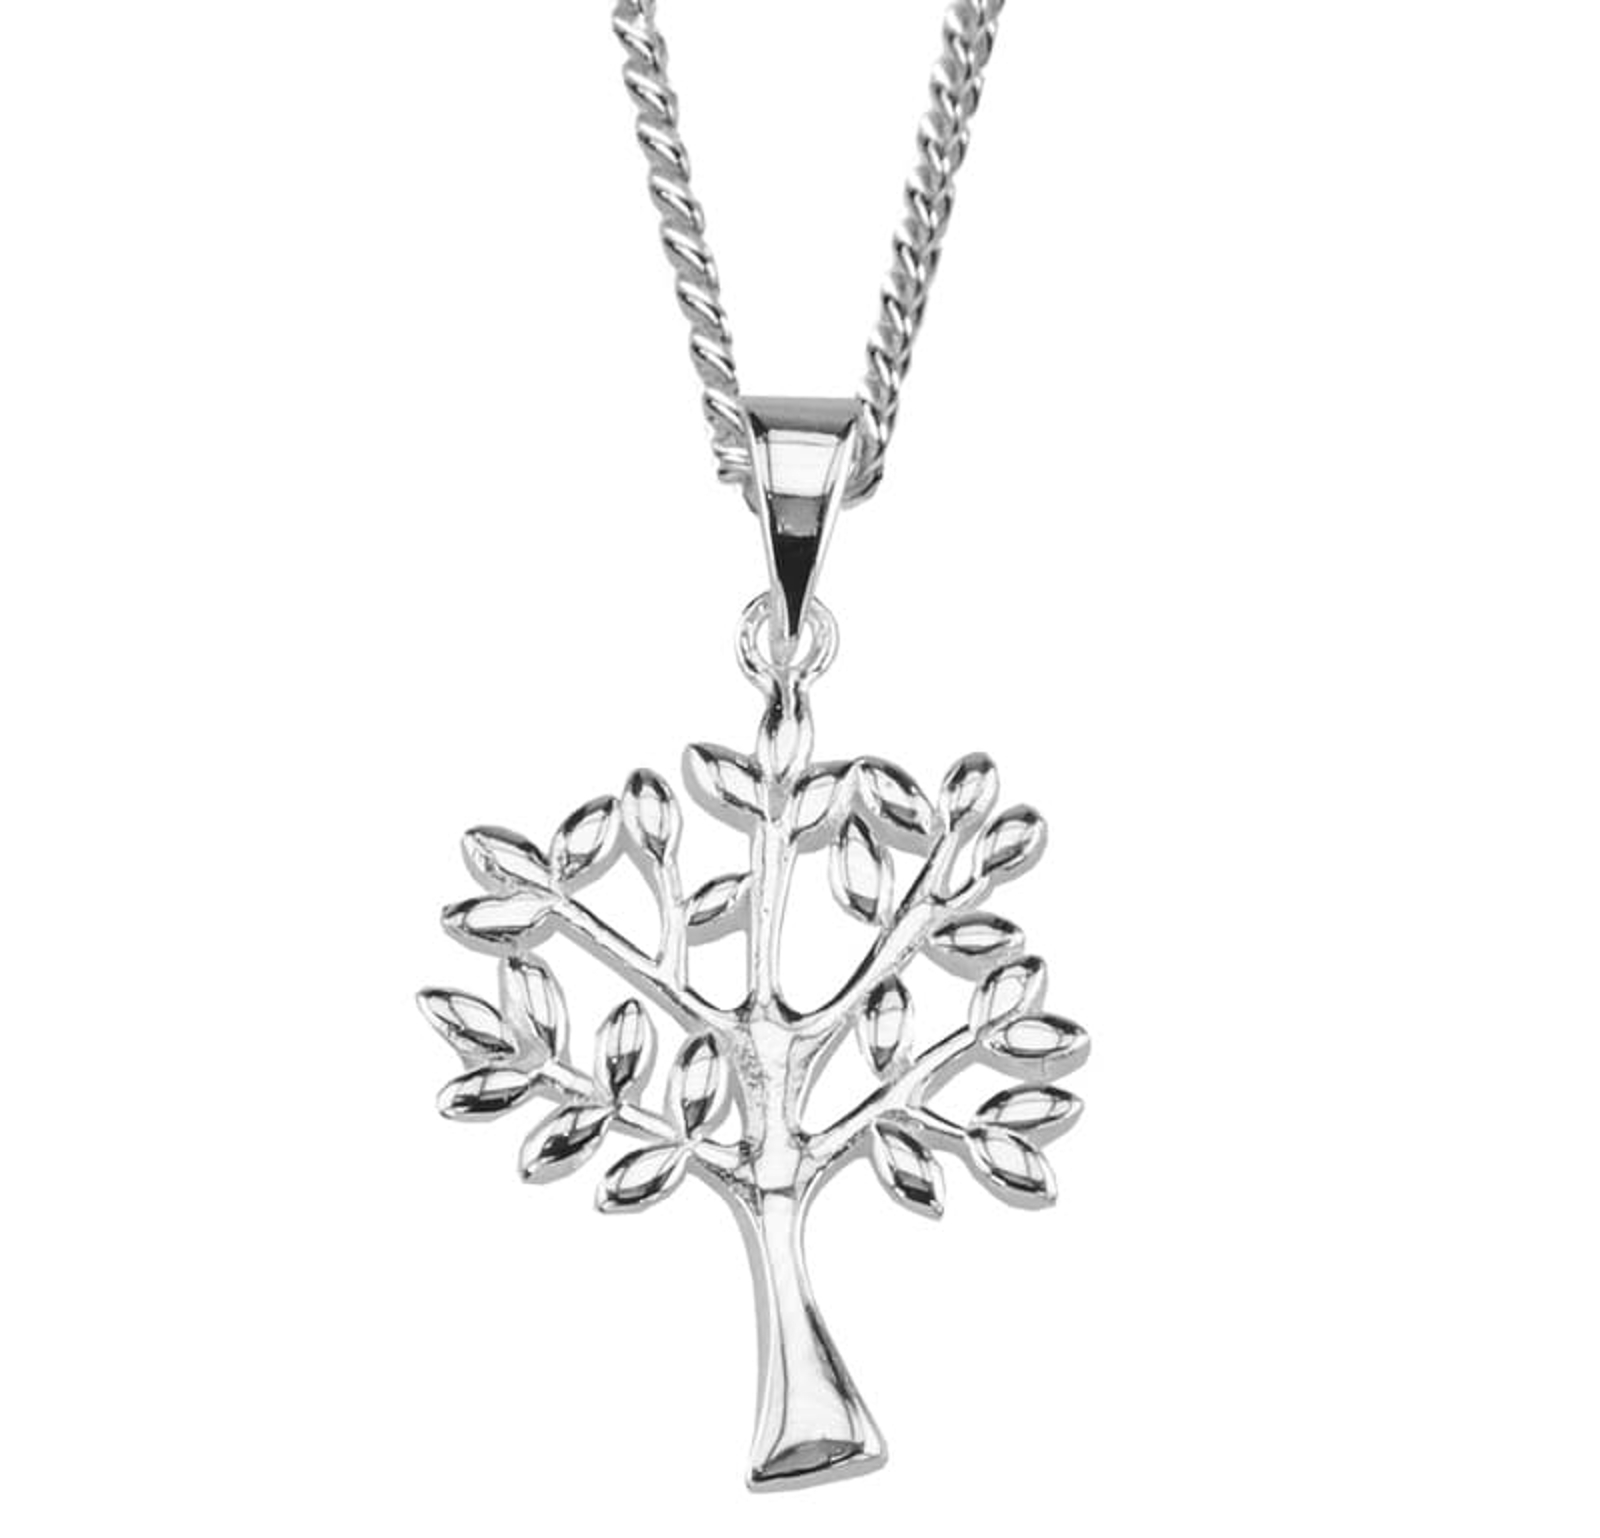 TREE OF LIFE PENDANT SILVER PLATED NECKLACE CHOICE CHAIN LENGTH 16" 18" OR 20" 